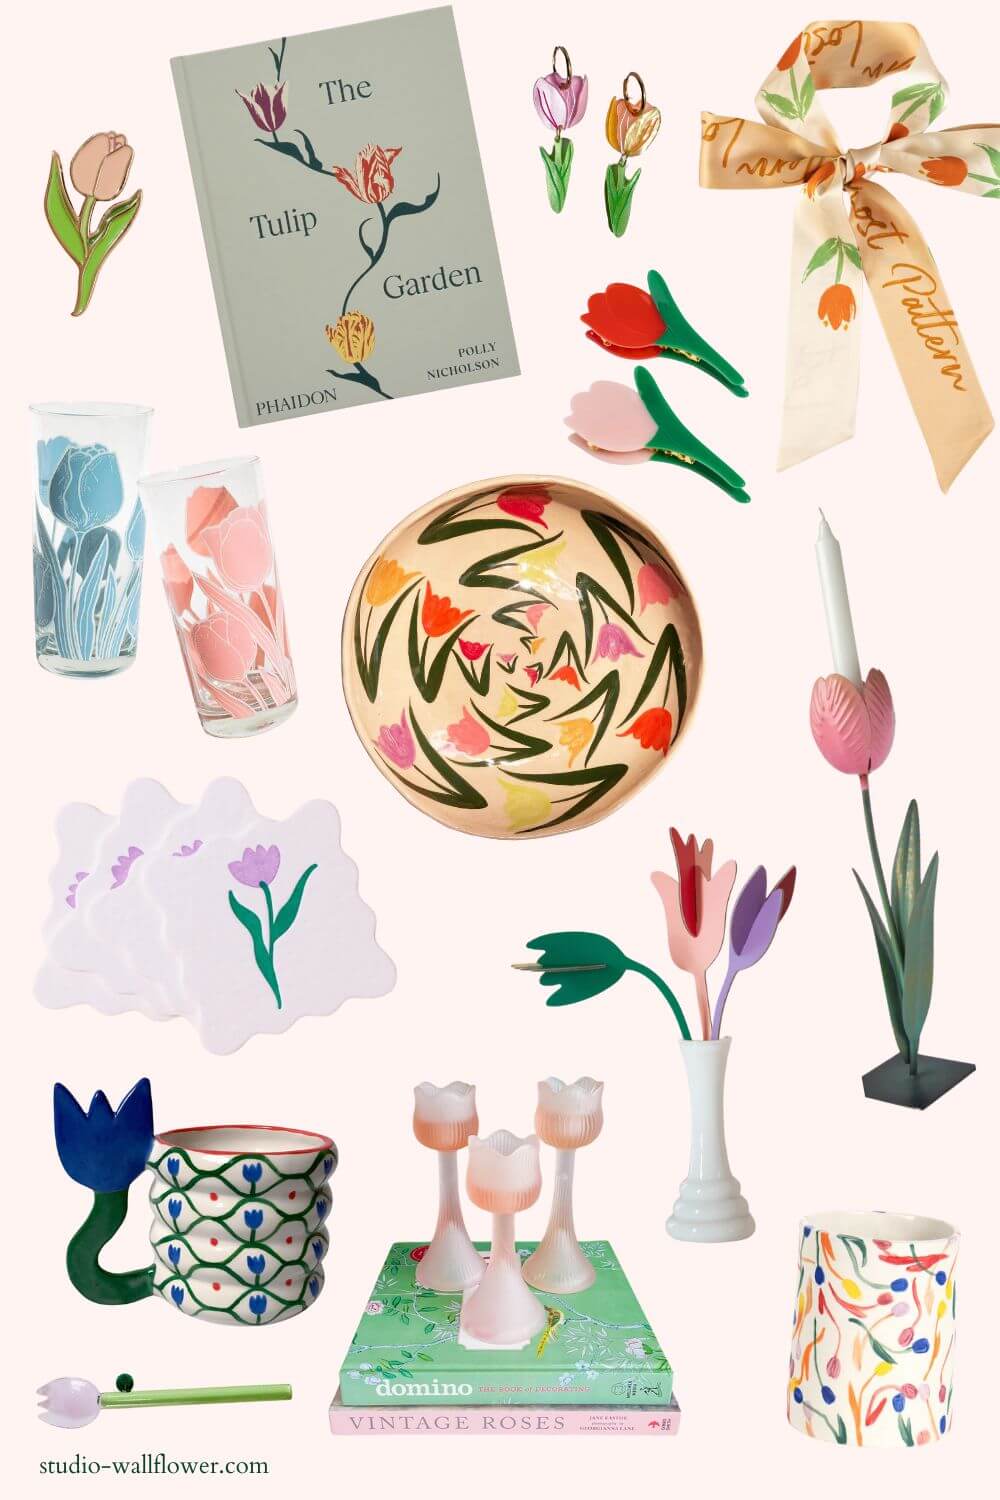 Trending for spring: tulip decor new and vintage